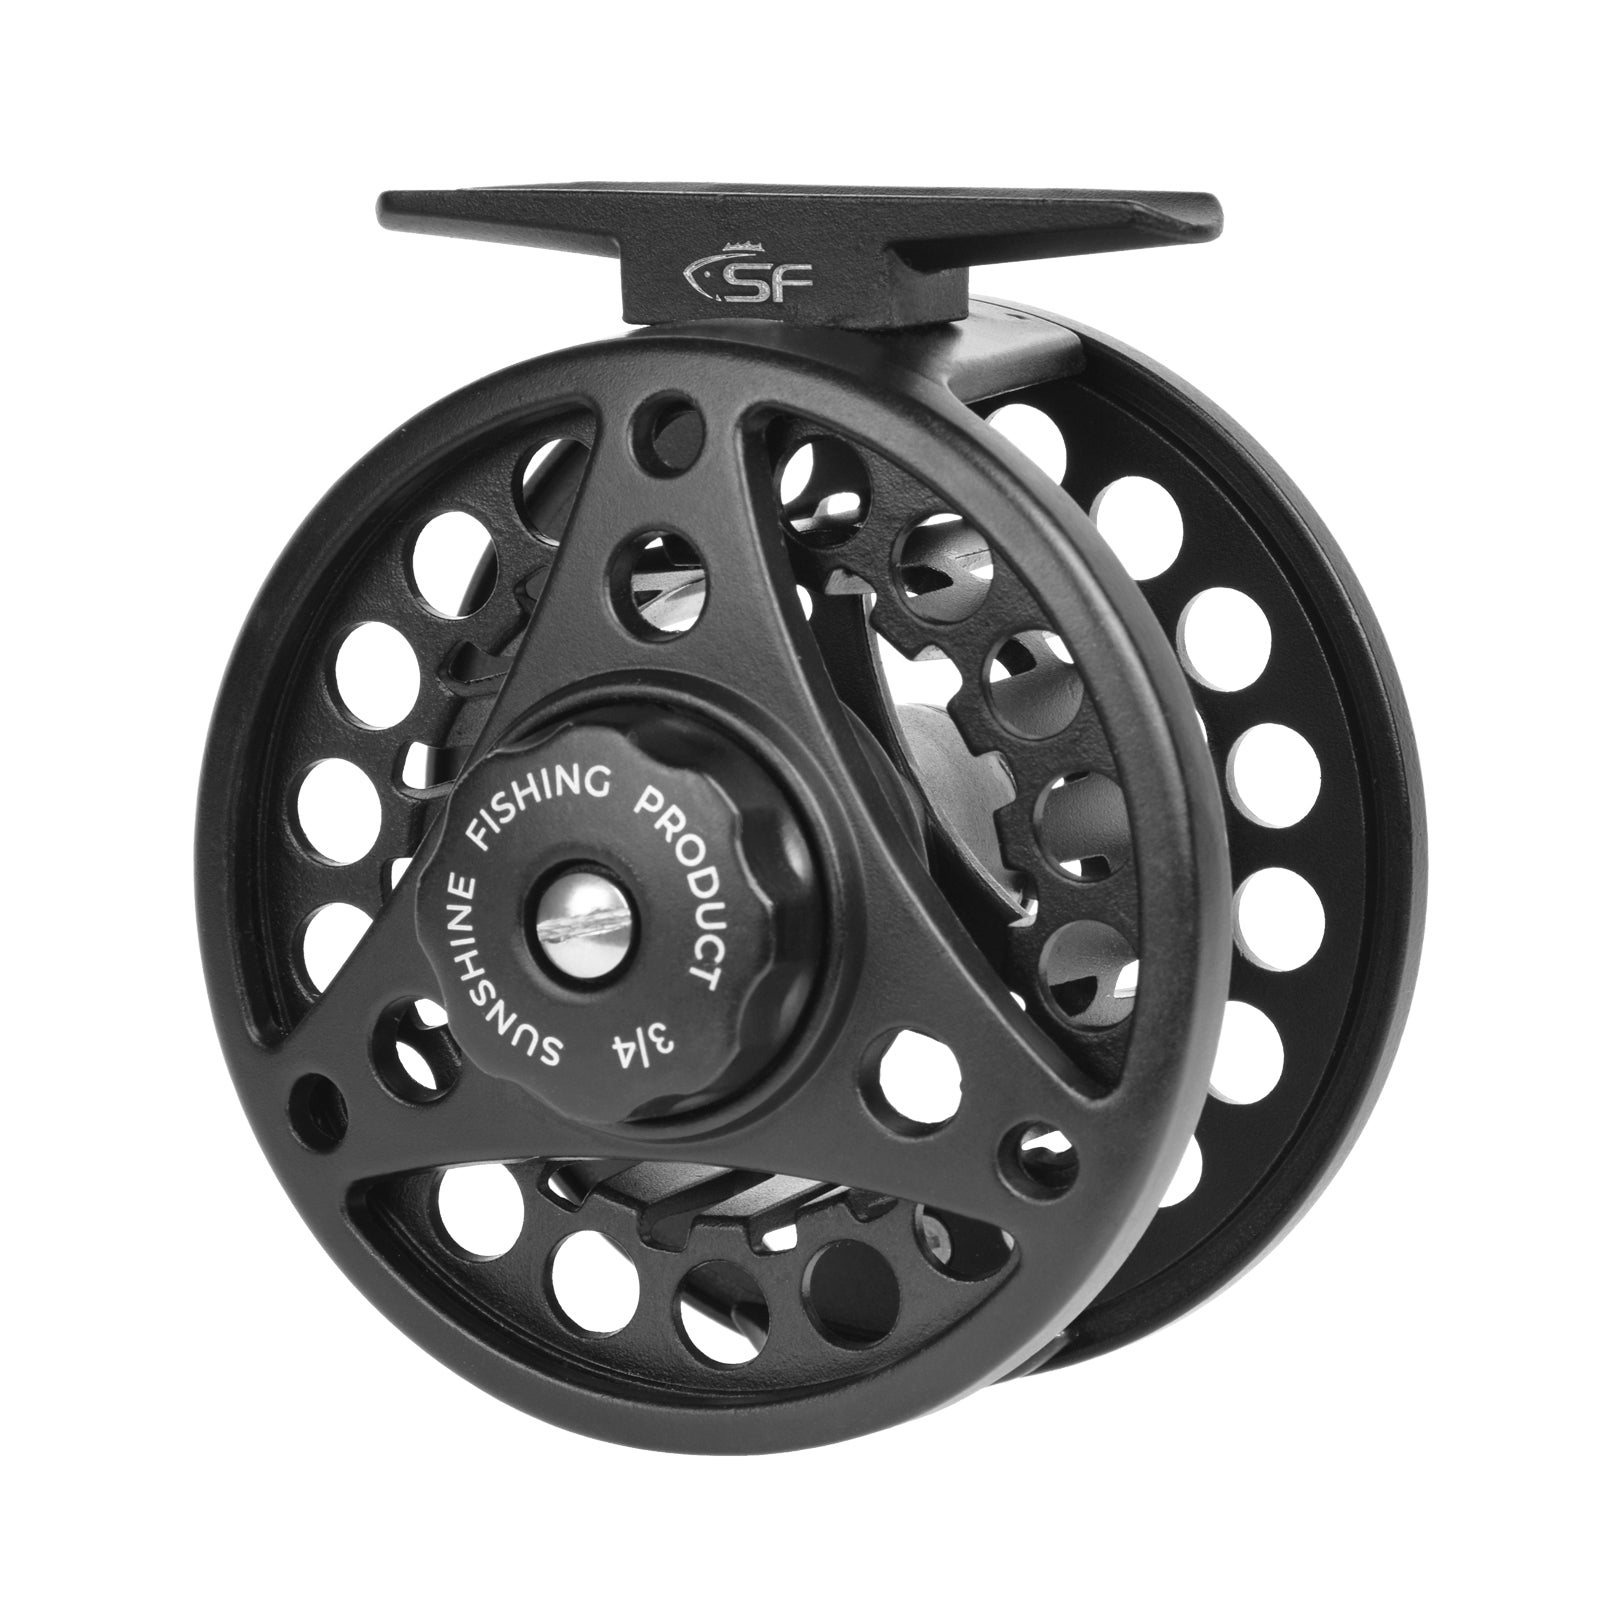 Topline Tackle Large Arbor Fly Fishing Reel with Aluminum Alloy